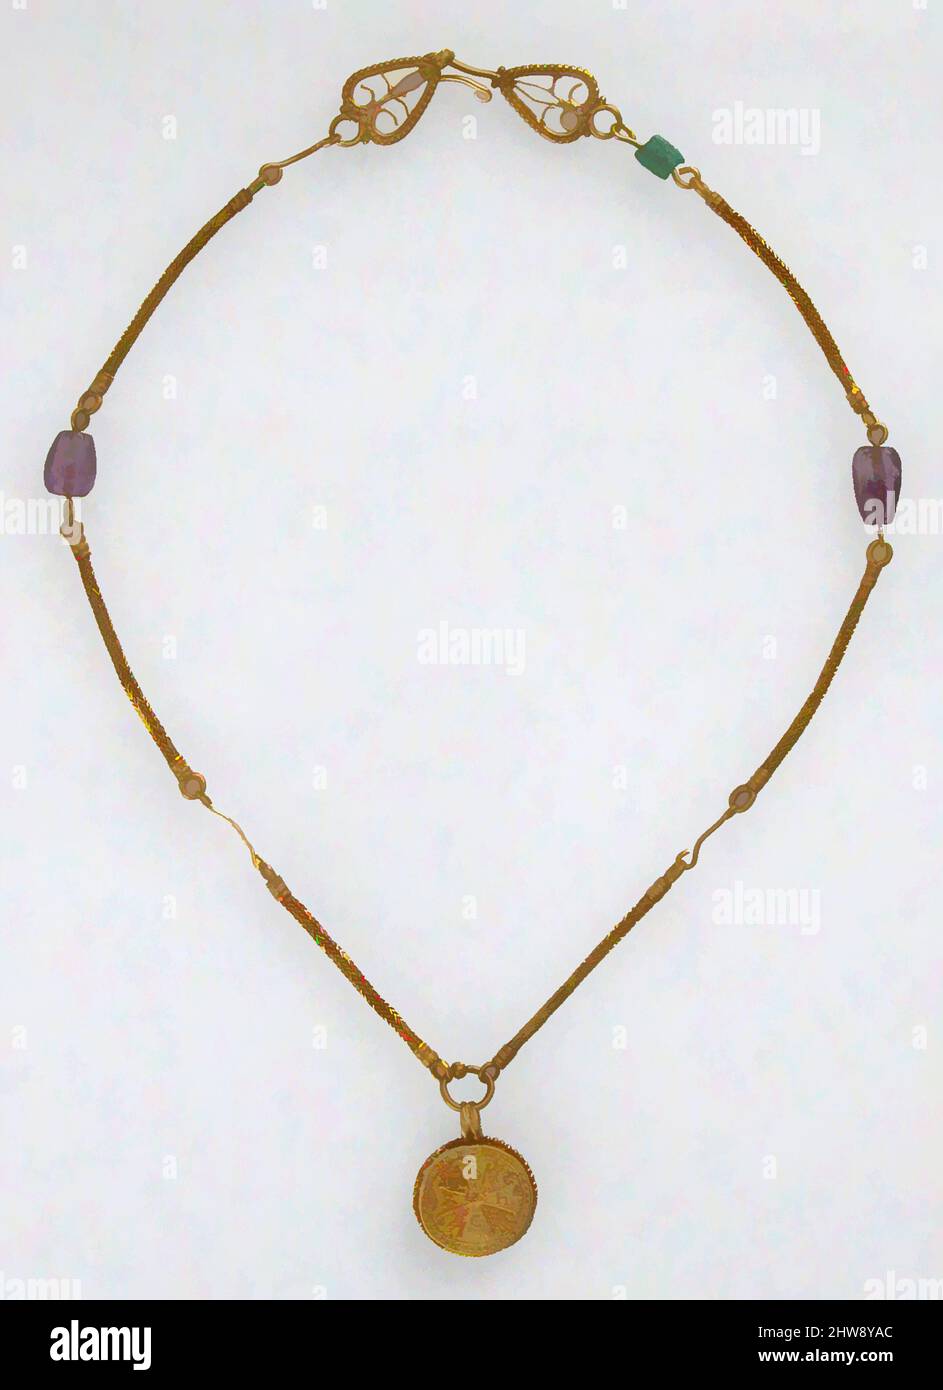 Art inspired by Gold Necklace with Gold Cross, Two Amethysts, and an Emerald Plasma, 6th–7th century, Byzantine, Gold, amethyst, emerald plasma, Overall (chain): 17 5/8 x 1/2 x 3/16 in. (44.8 x 1.2 x 0.4 cm), Metalwork-Gold, The cross, chased into the gold ground, was originally the, Classic works modernized by Artotop with a splash of modernity. Shapes, color and value, eye-catching visual impact on art. Emotions through freedom of artworks in a contemporary way. A timeless message pursuing a wildly creative new direction. Artists turning to the digital medium and creating the Artotop NFT Stock Photo